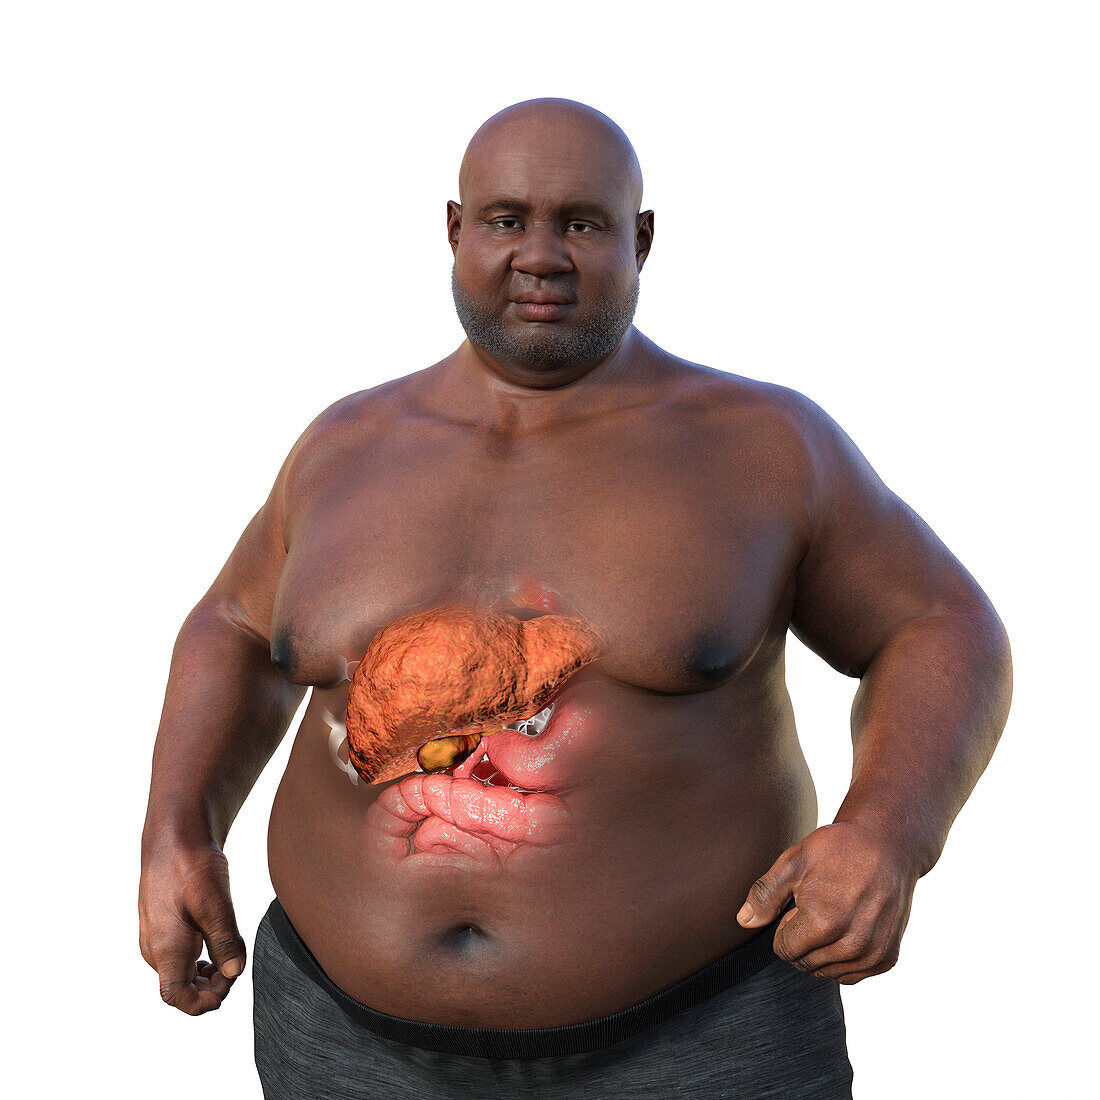 Overweight man with steatosis, illustration